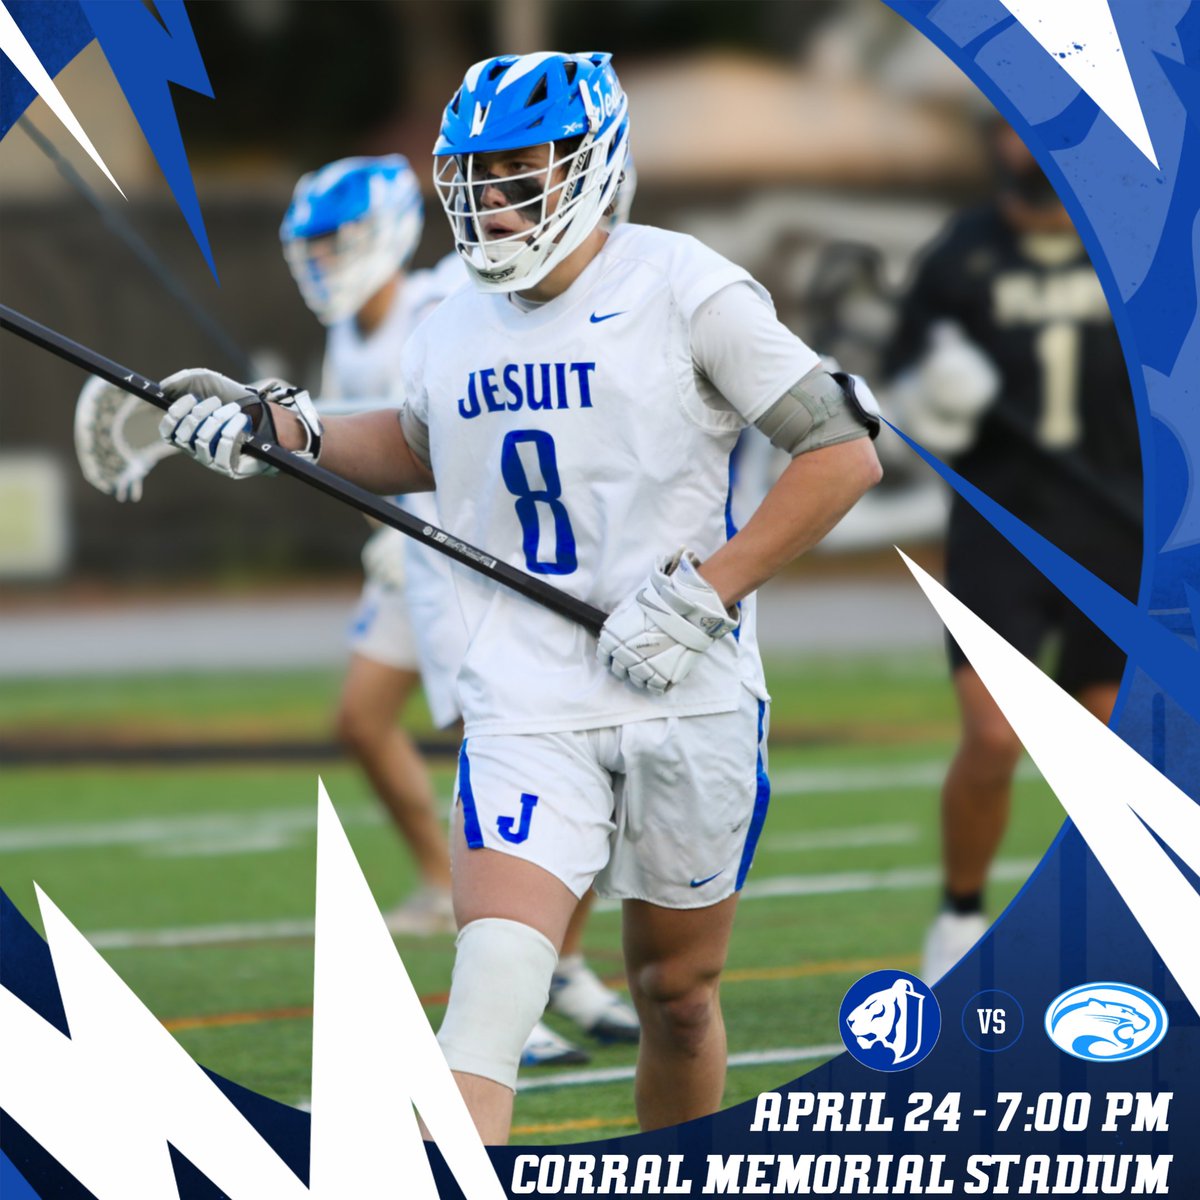 The Region Quarterfinal is tonight! Jesuit lacrosse hosts Canterbury at Corral Memorial Stadium, come out and support the Tigers! #AMDG #GoTigers